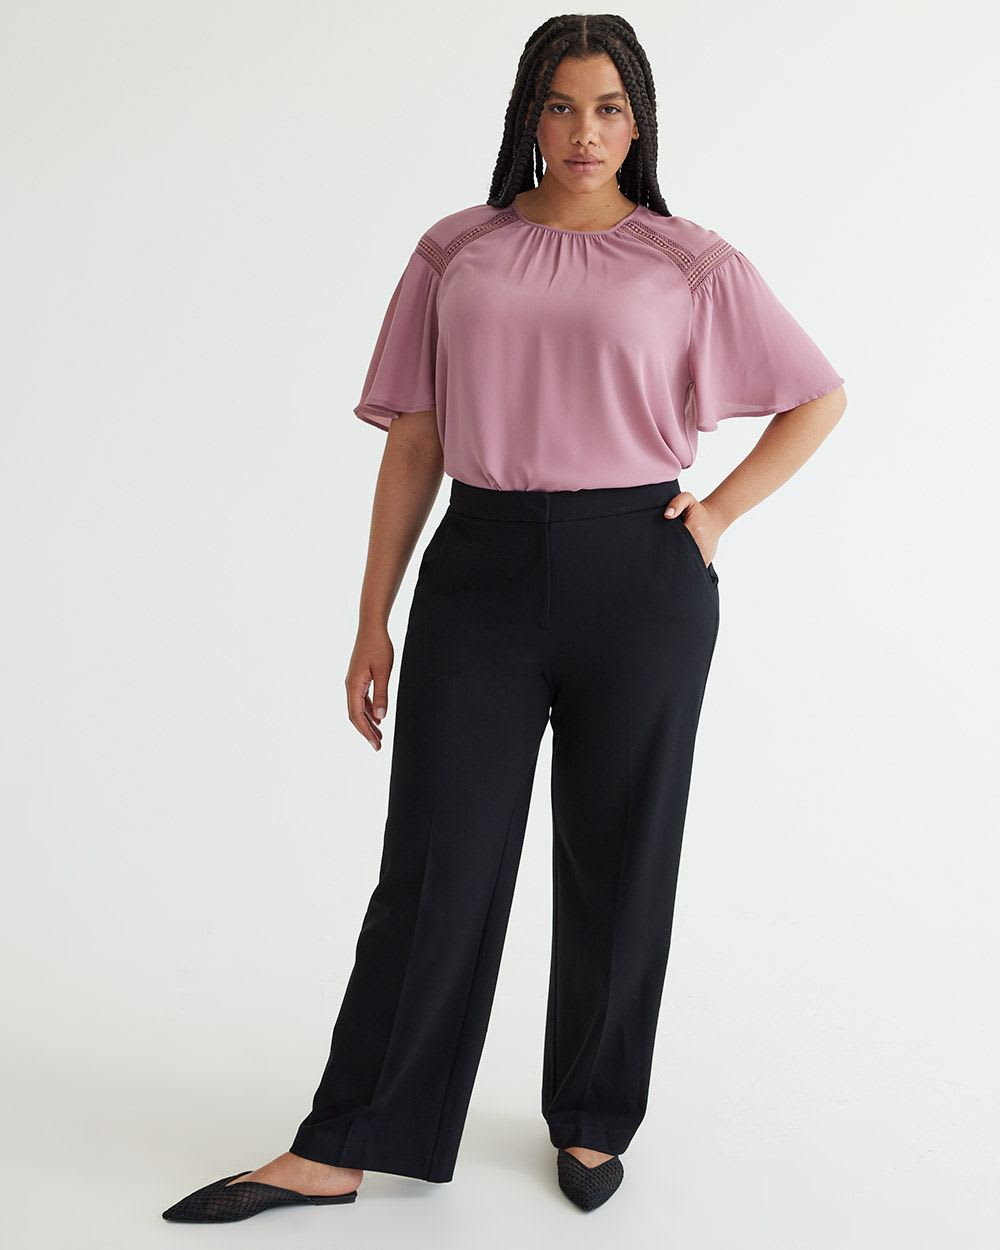 Shimmery Wide-Leg High-Rise Pant - Tall, Tall